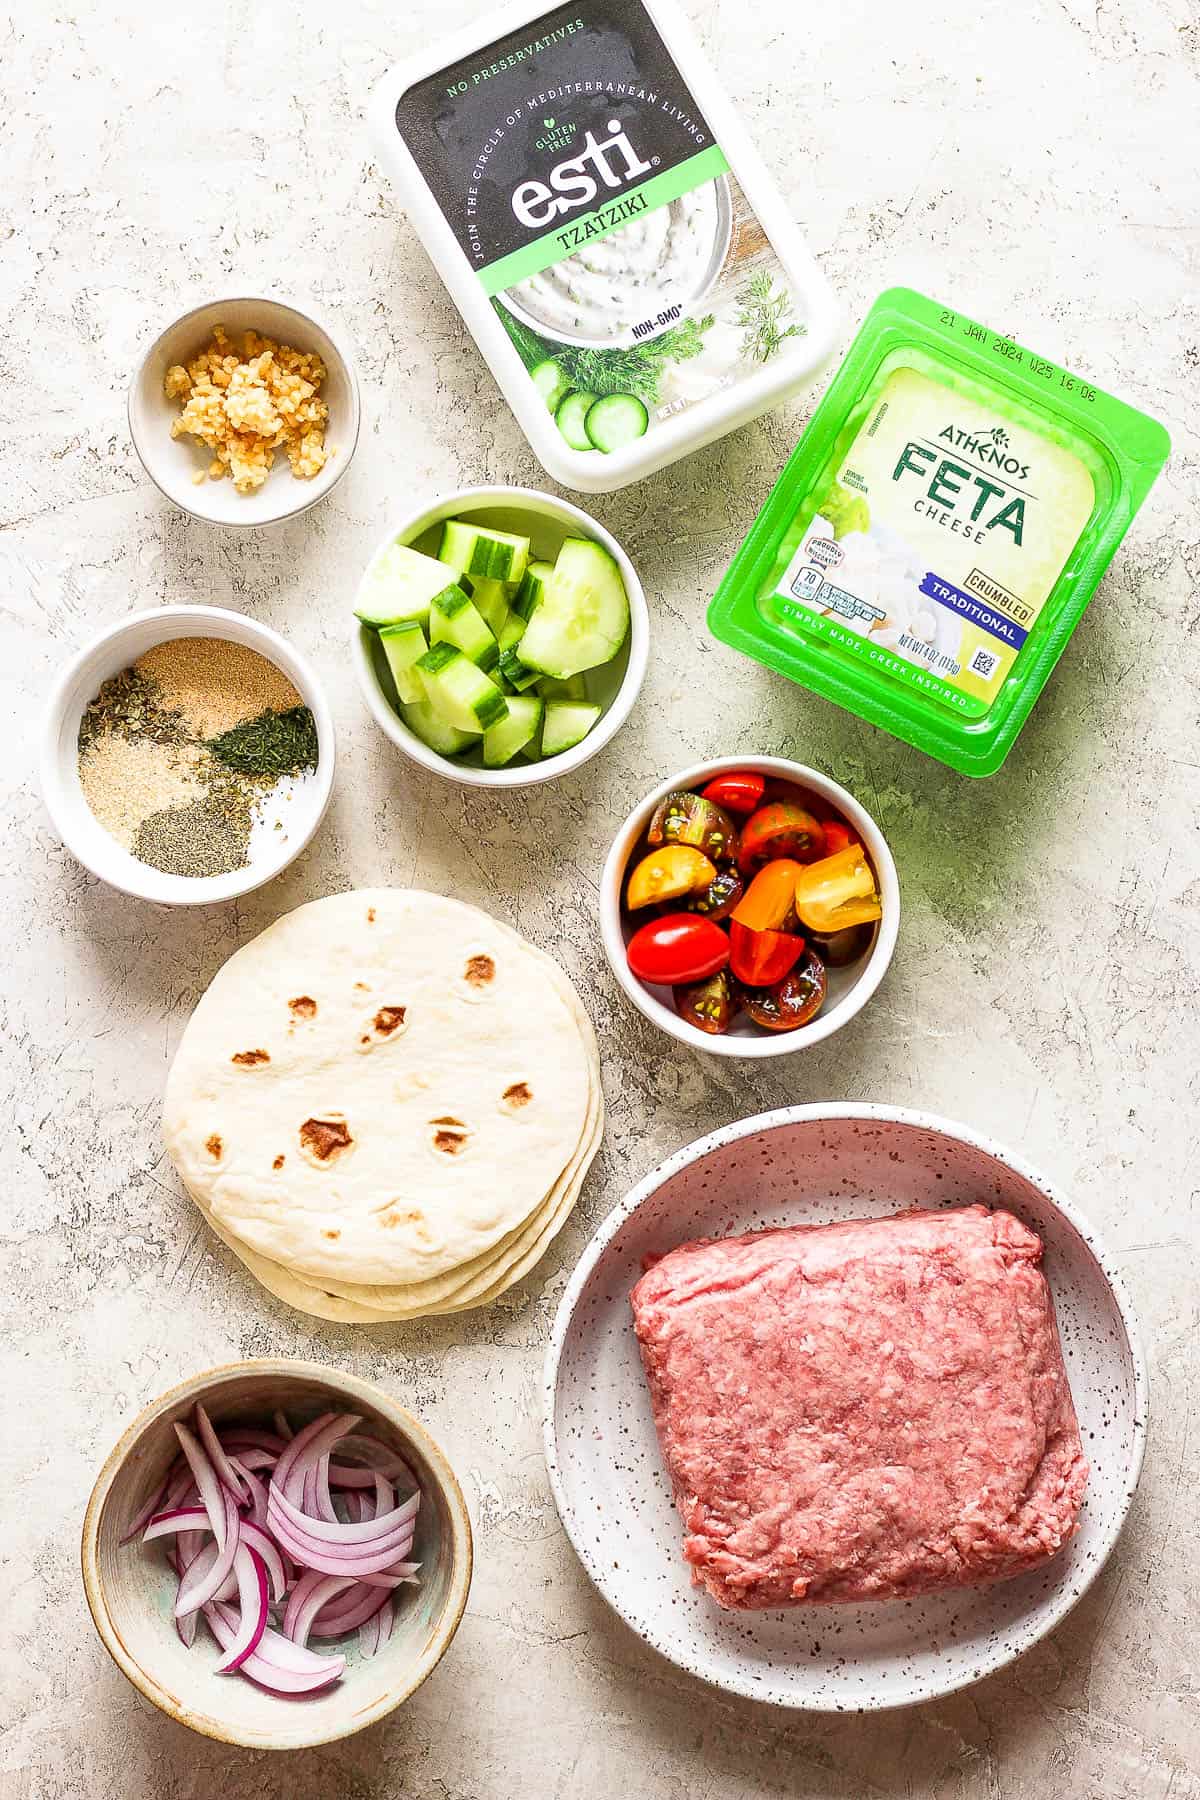 Individual bowls of cut cherry tomatoes, quartered cucumbers, sliced red onion, raw ground lamb, a stack of tortillas, a package of feta cheese, a bowl of seasonings, minced garlic, and tzatziki sauce.